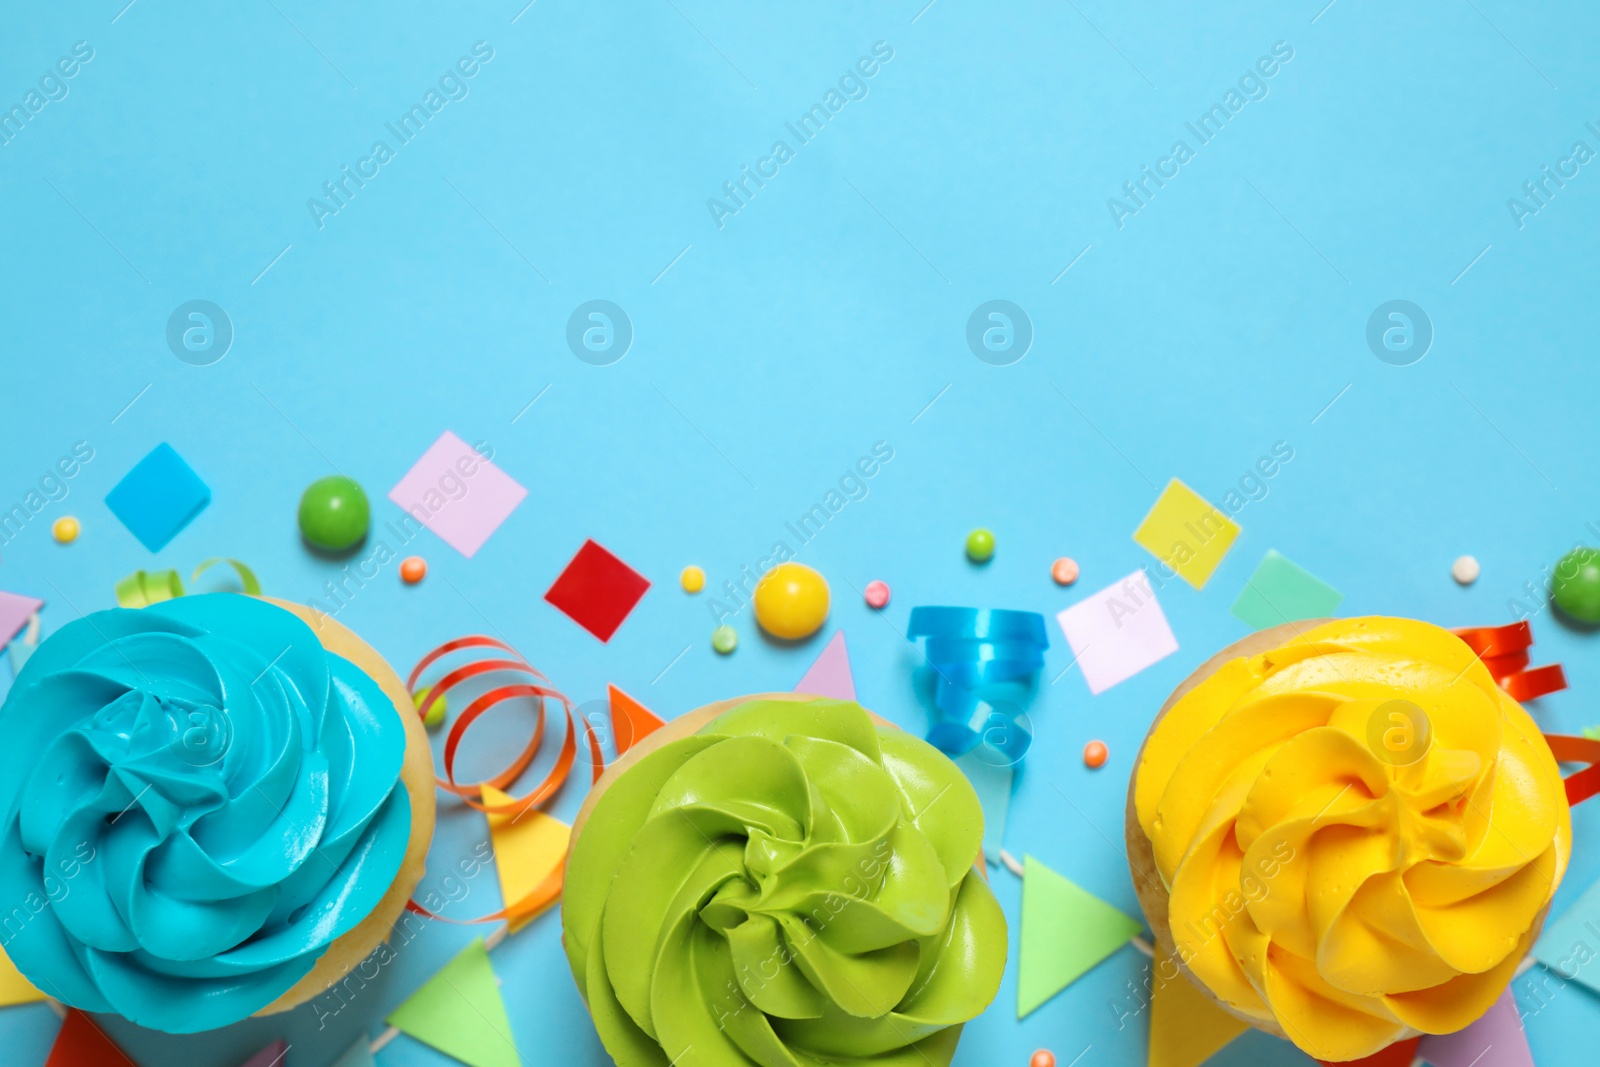 Photo of Colorful birthday cupcakes on light blue background, flat lay. Space for text